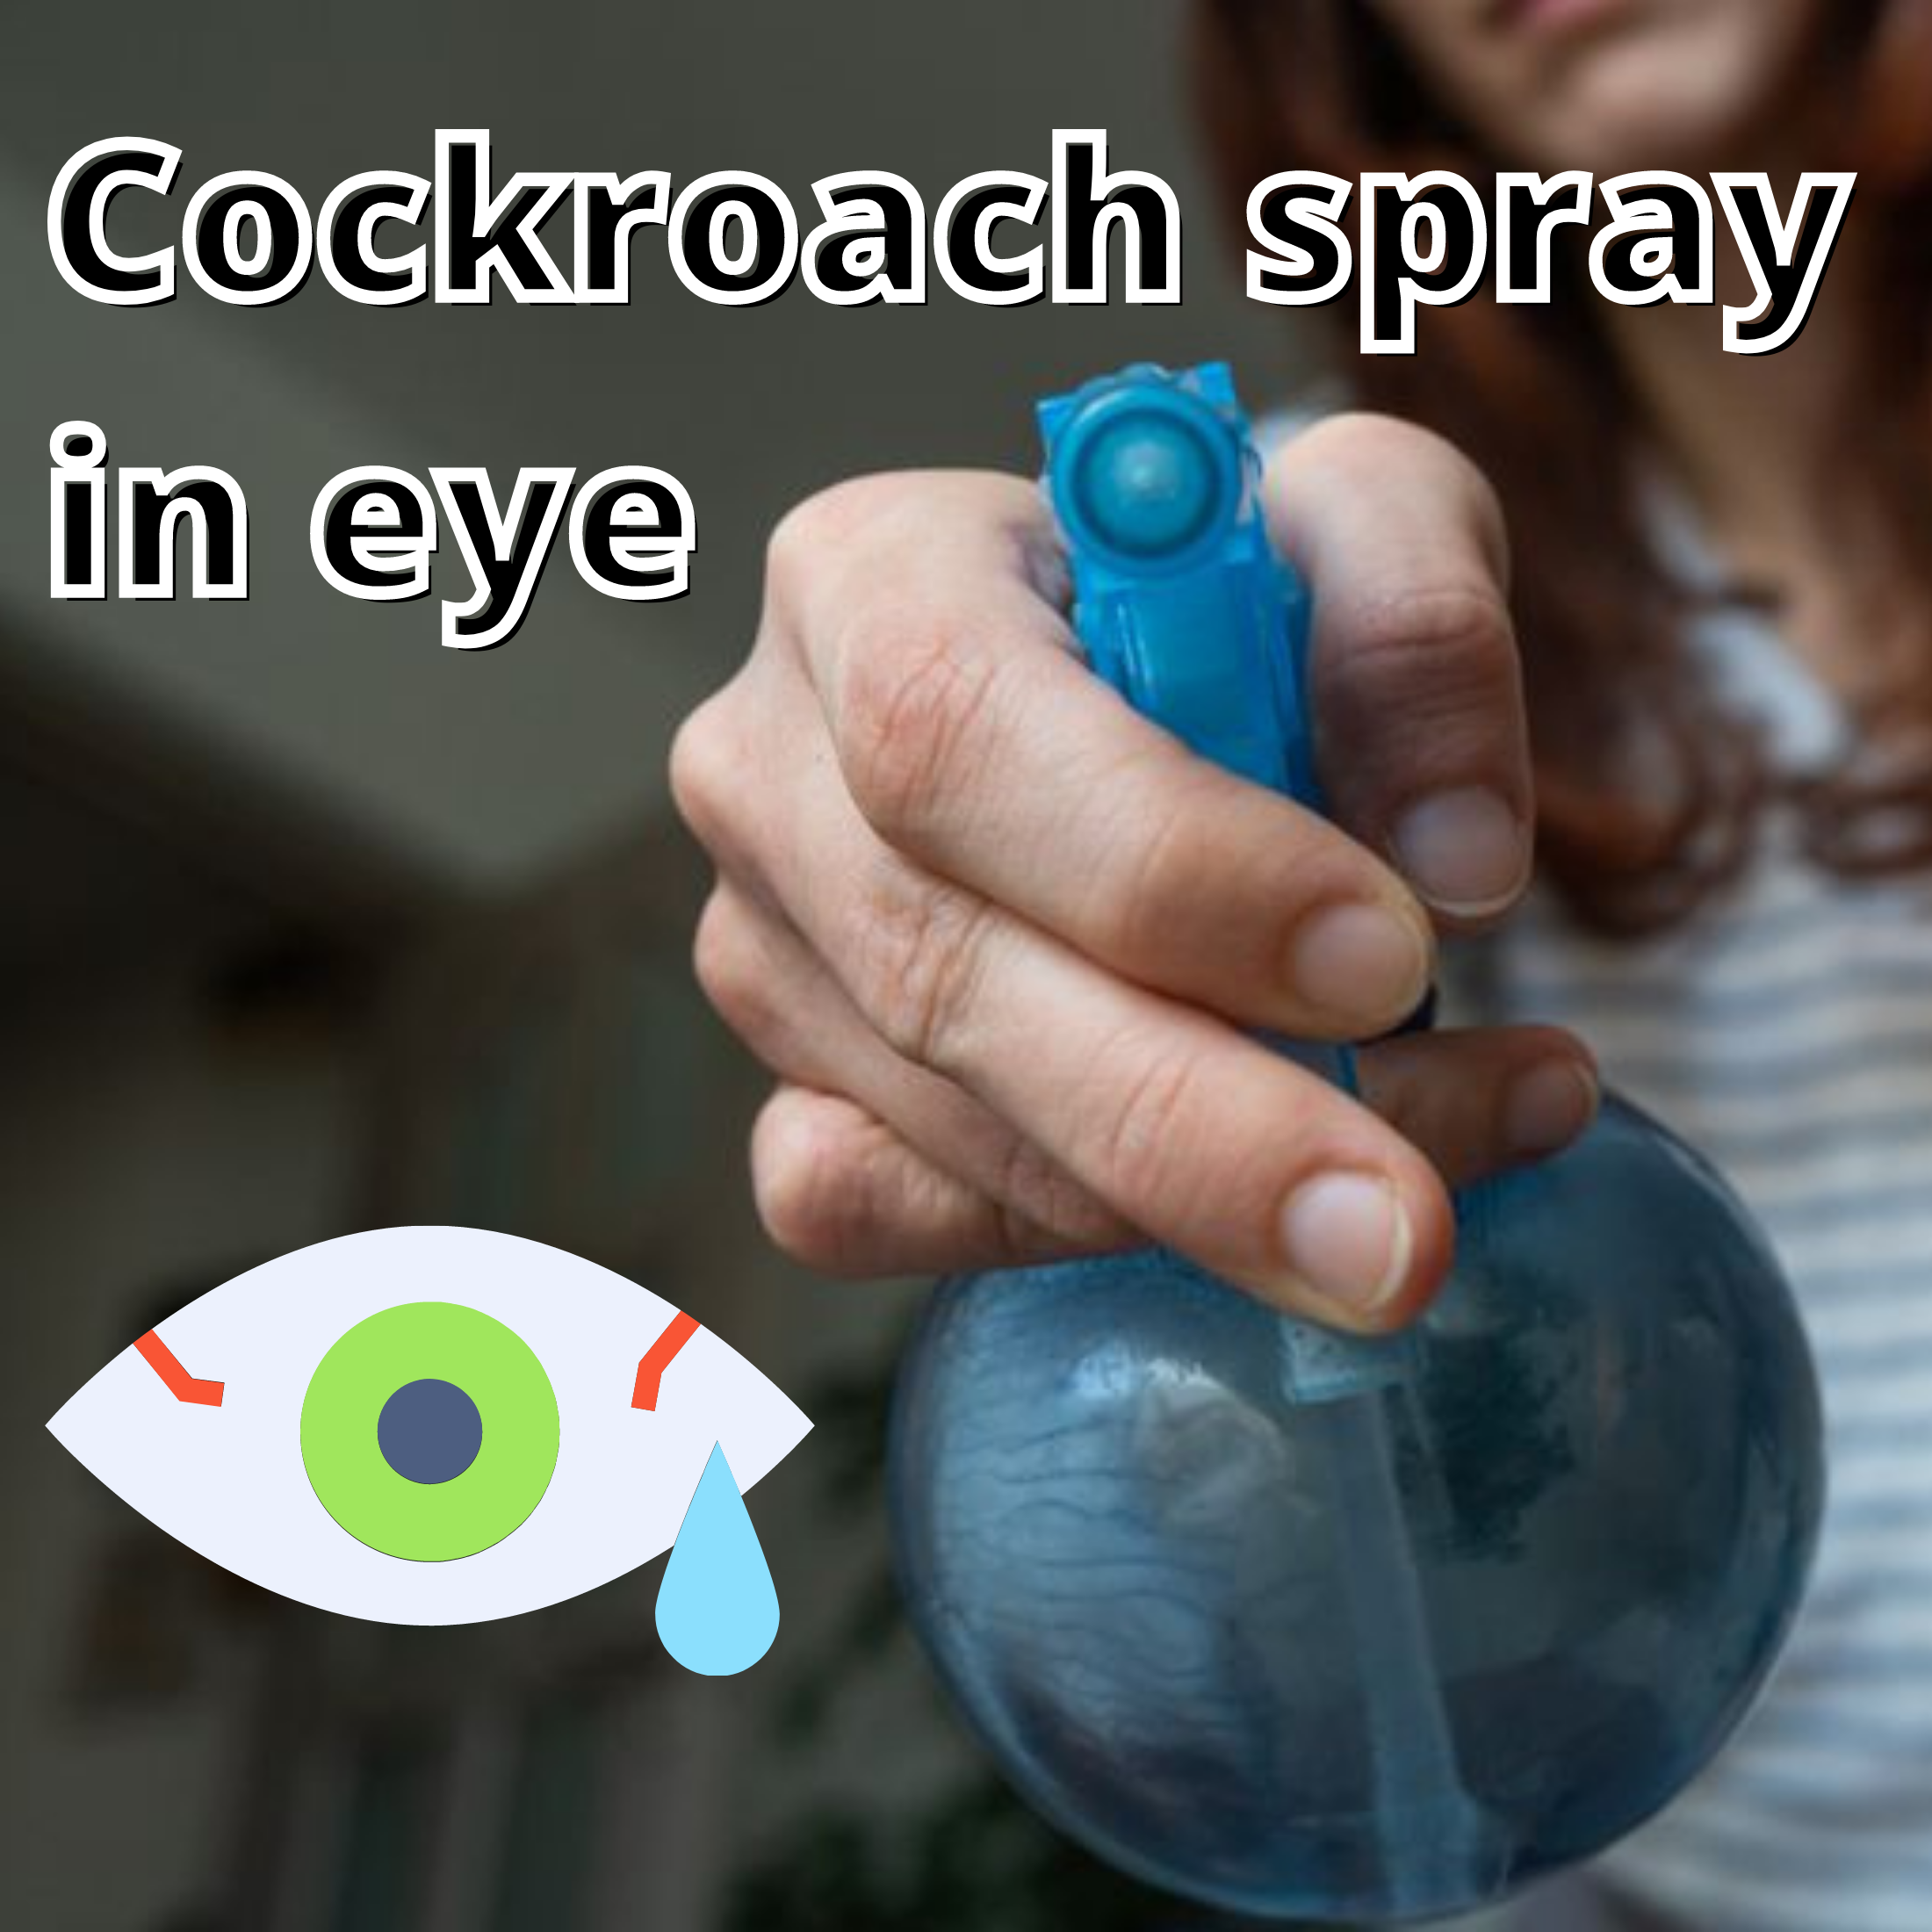 Is it harmful if cockroach pesticide spray goes into the eyes?